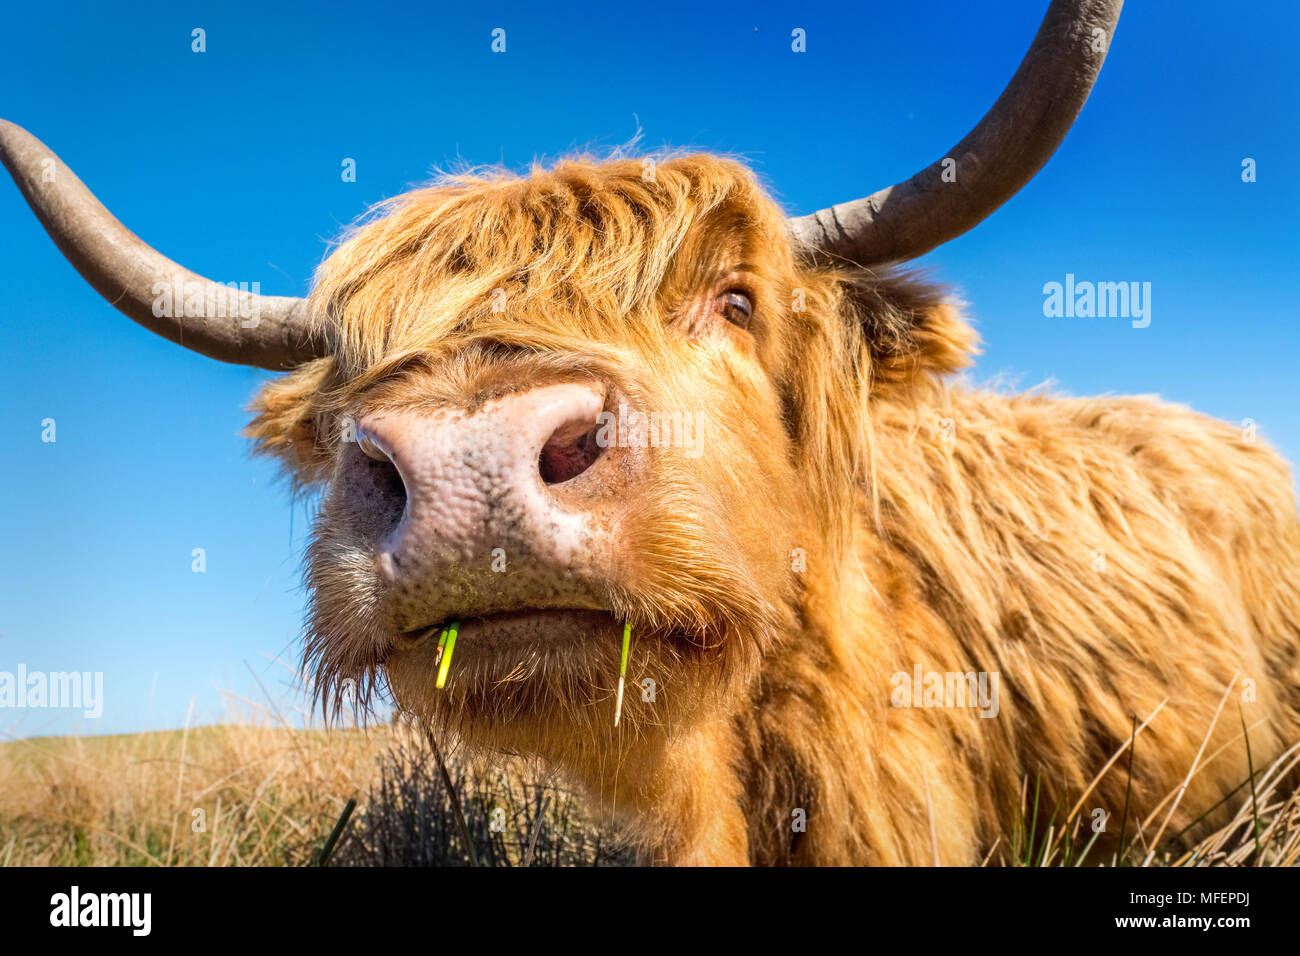 Highland cow / cattle grazing on moorland Stock Photo